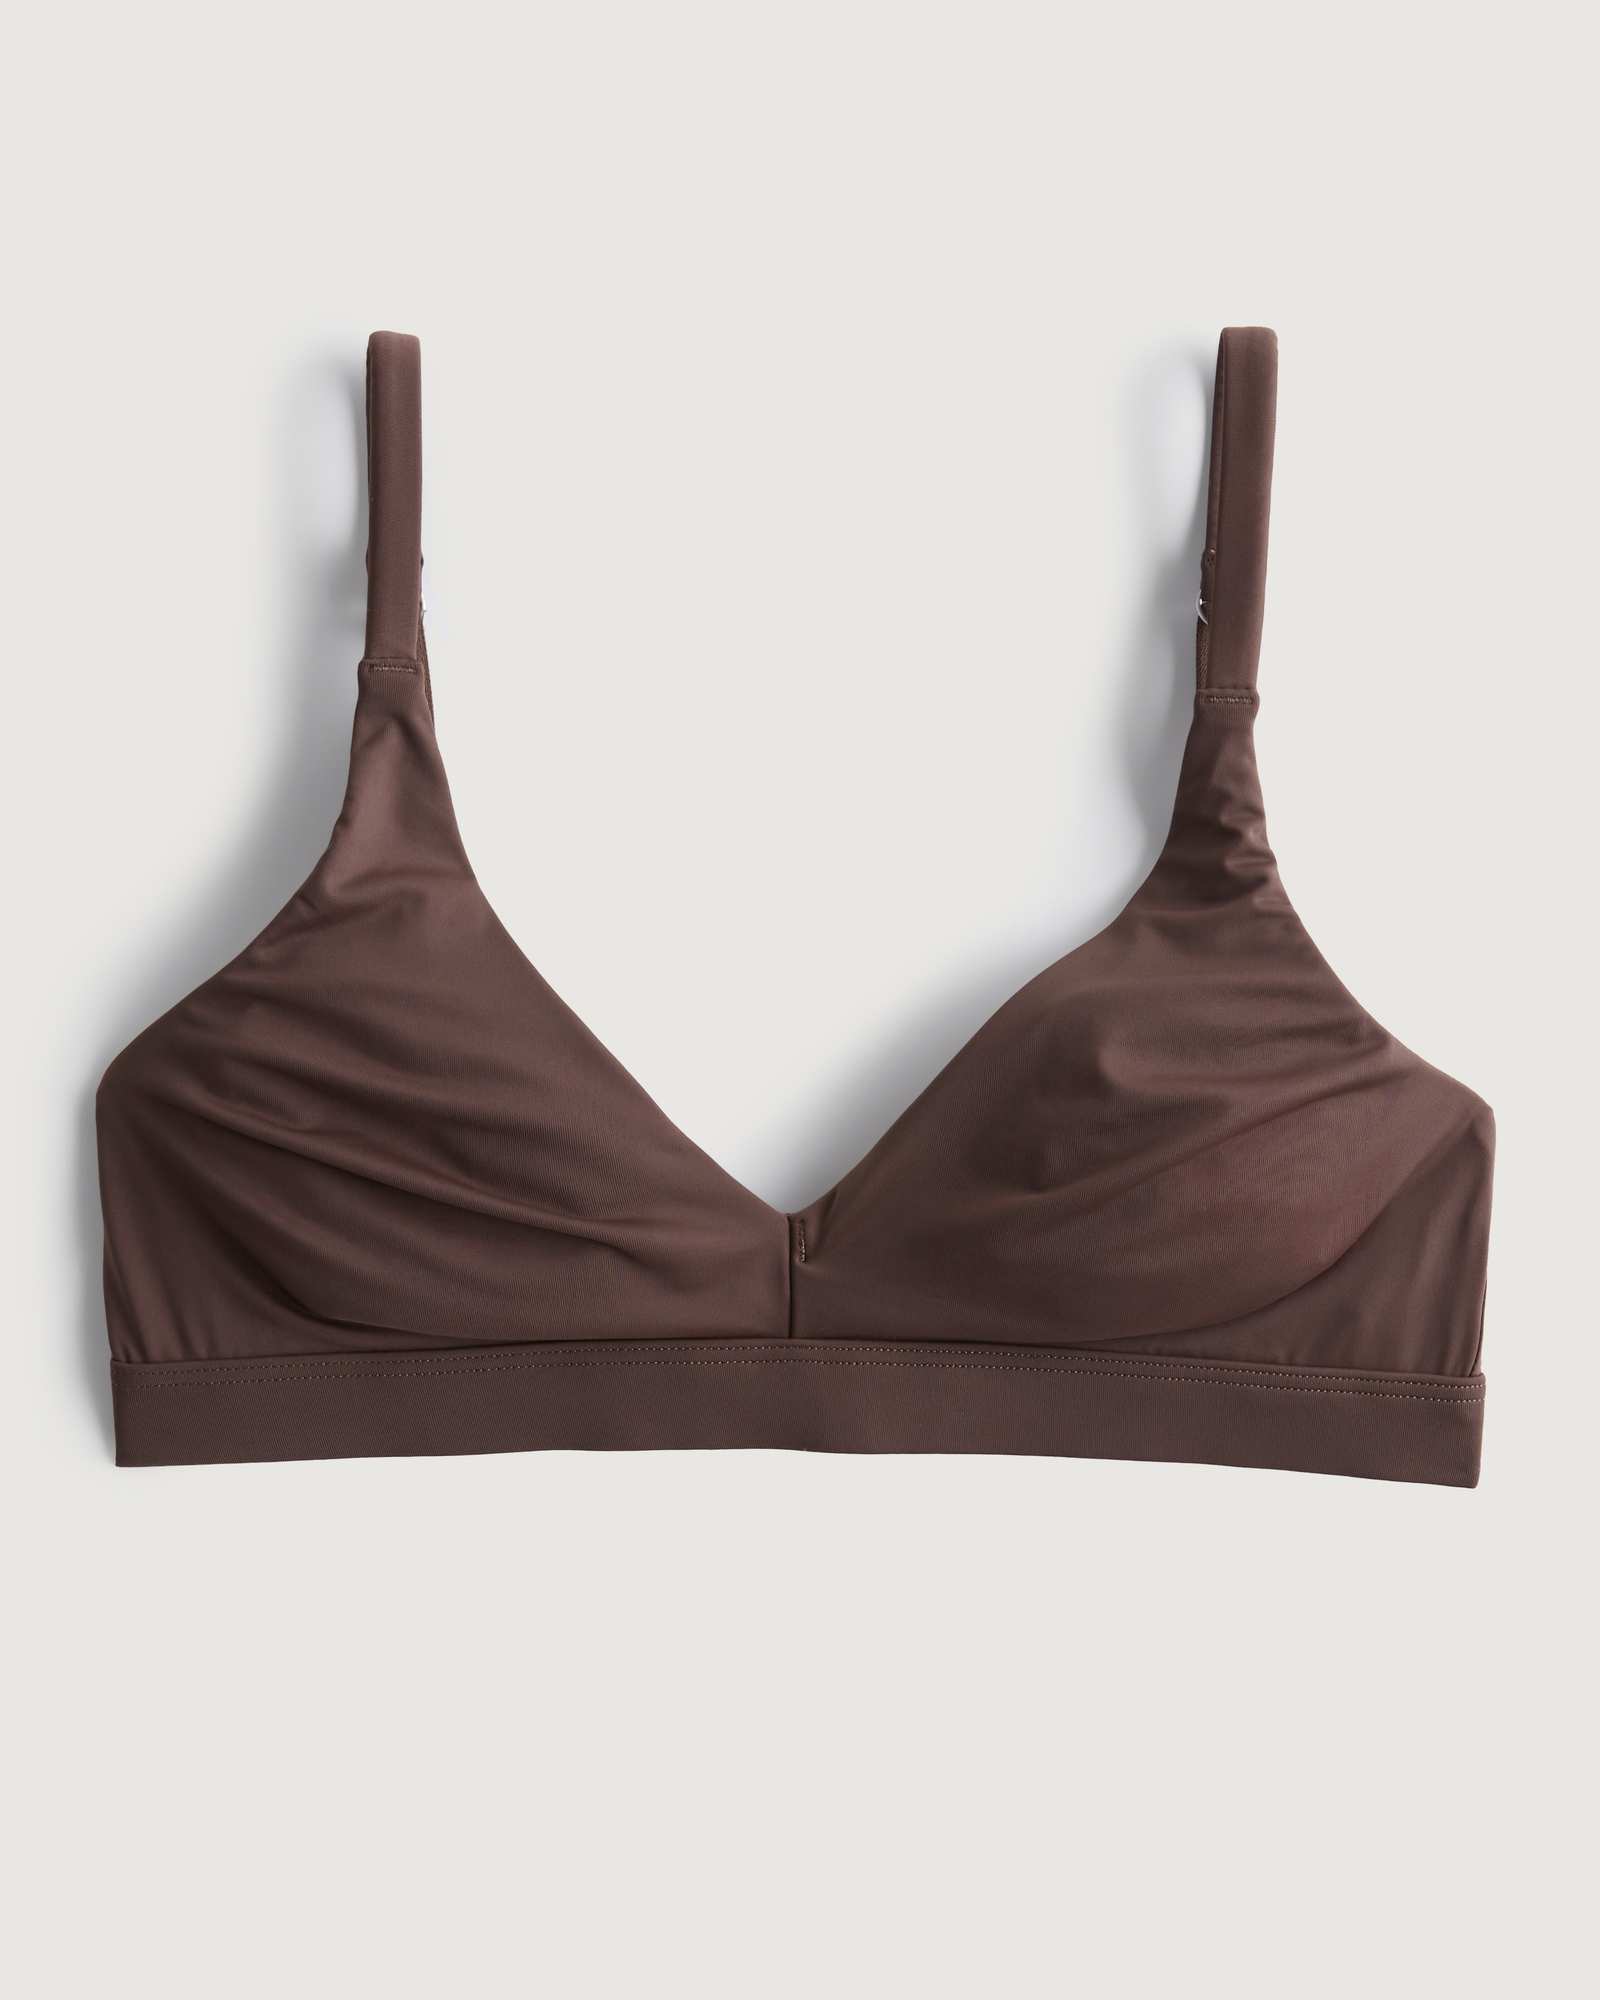 Cotton:On seamless triangle bralette in brown